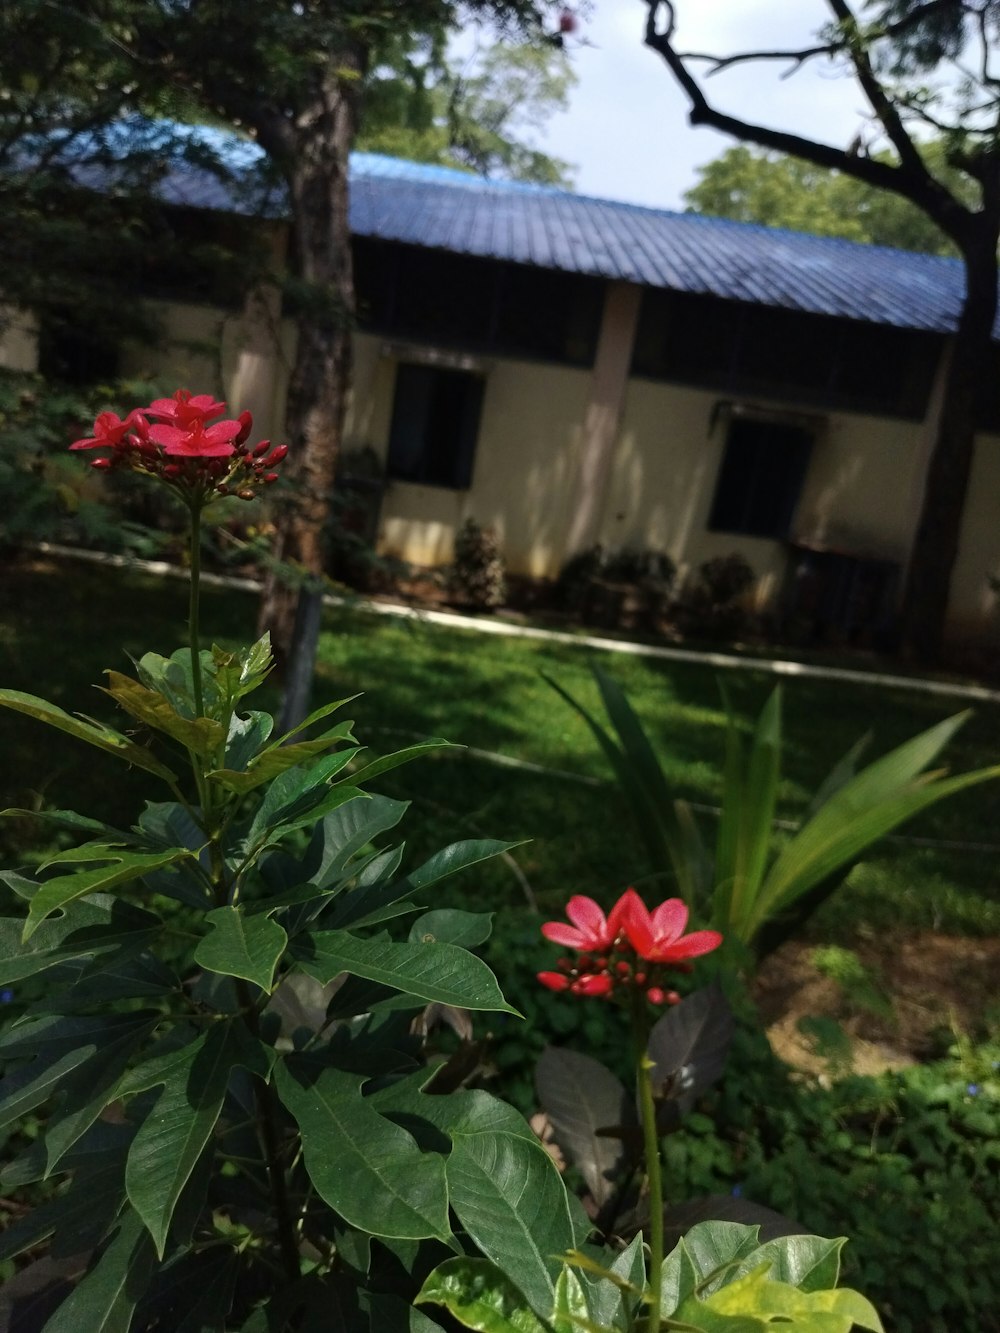 red flowers in front of a building with a blue roof